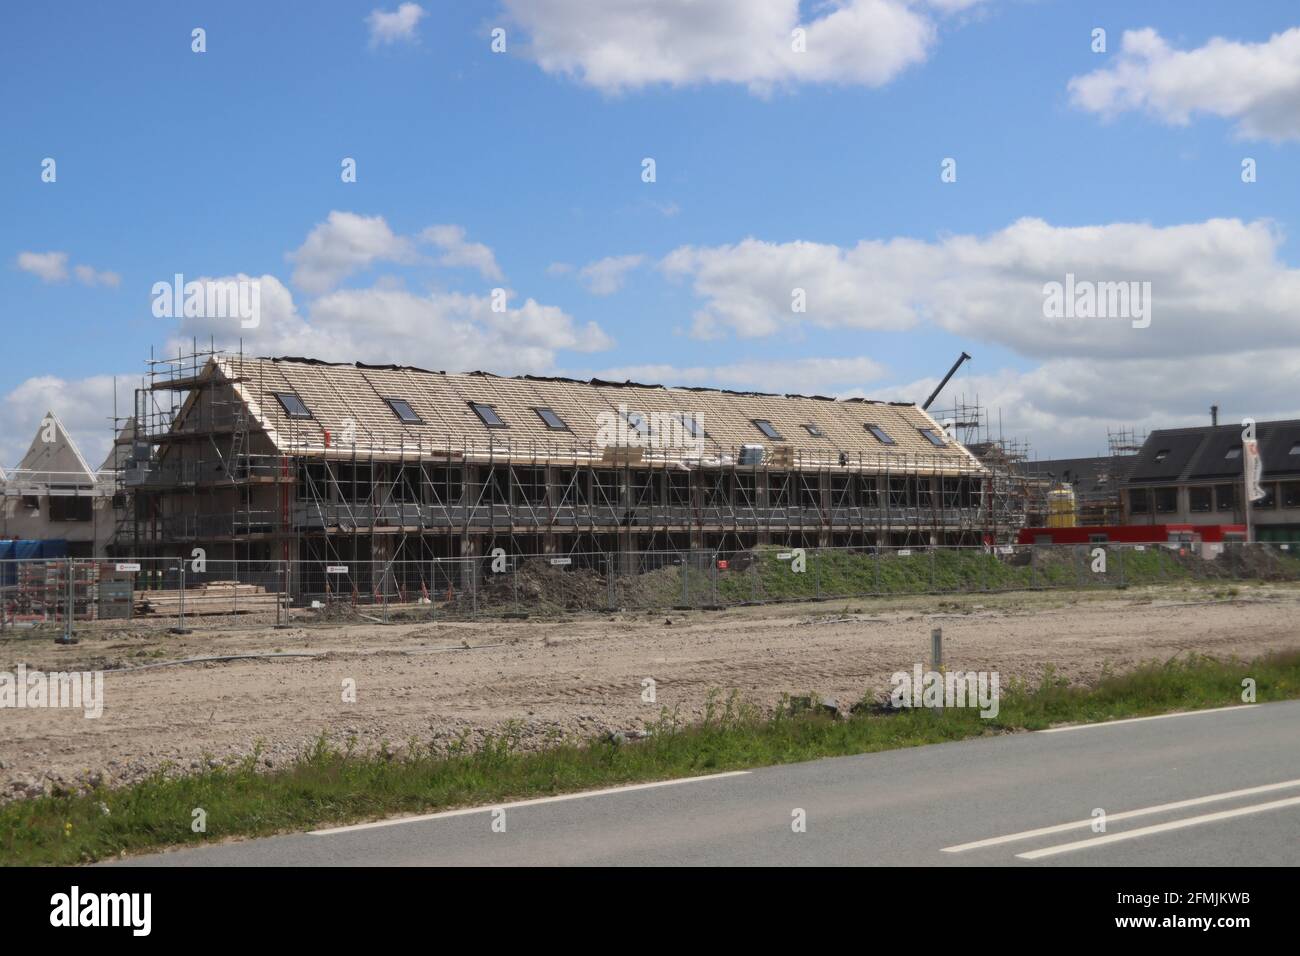 construction of houses in area called Triangel in Waddixveen Stock Photo